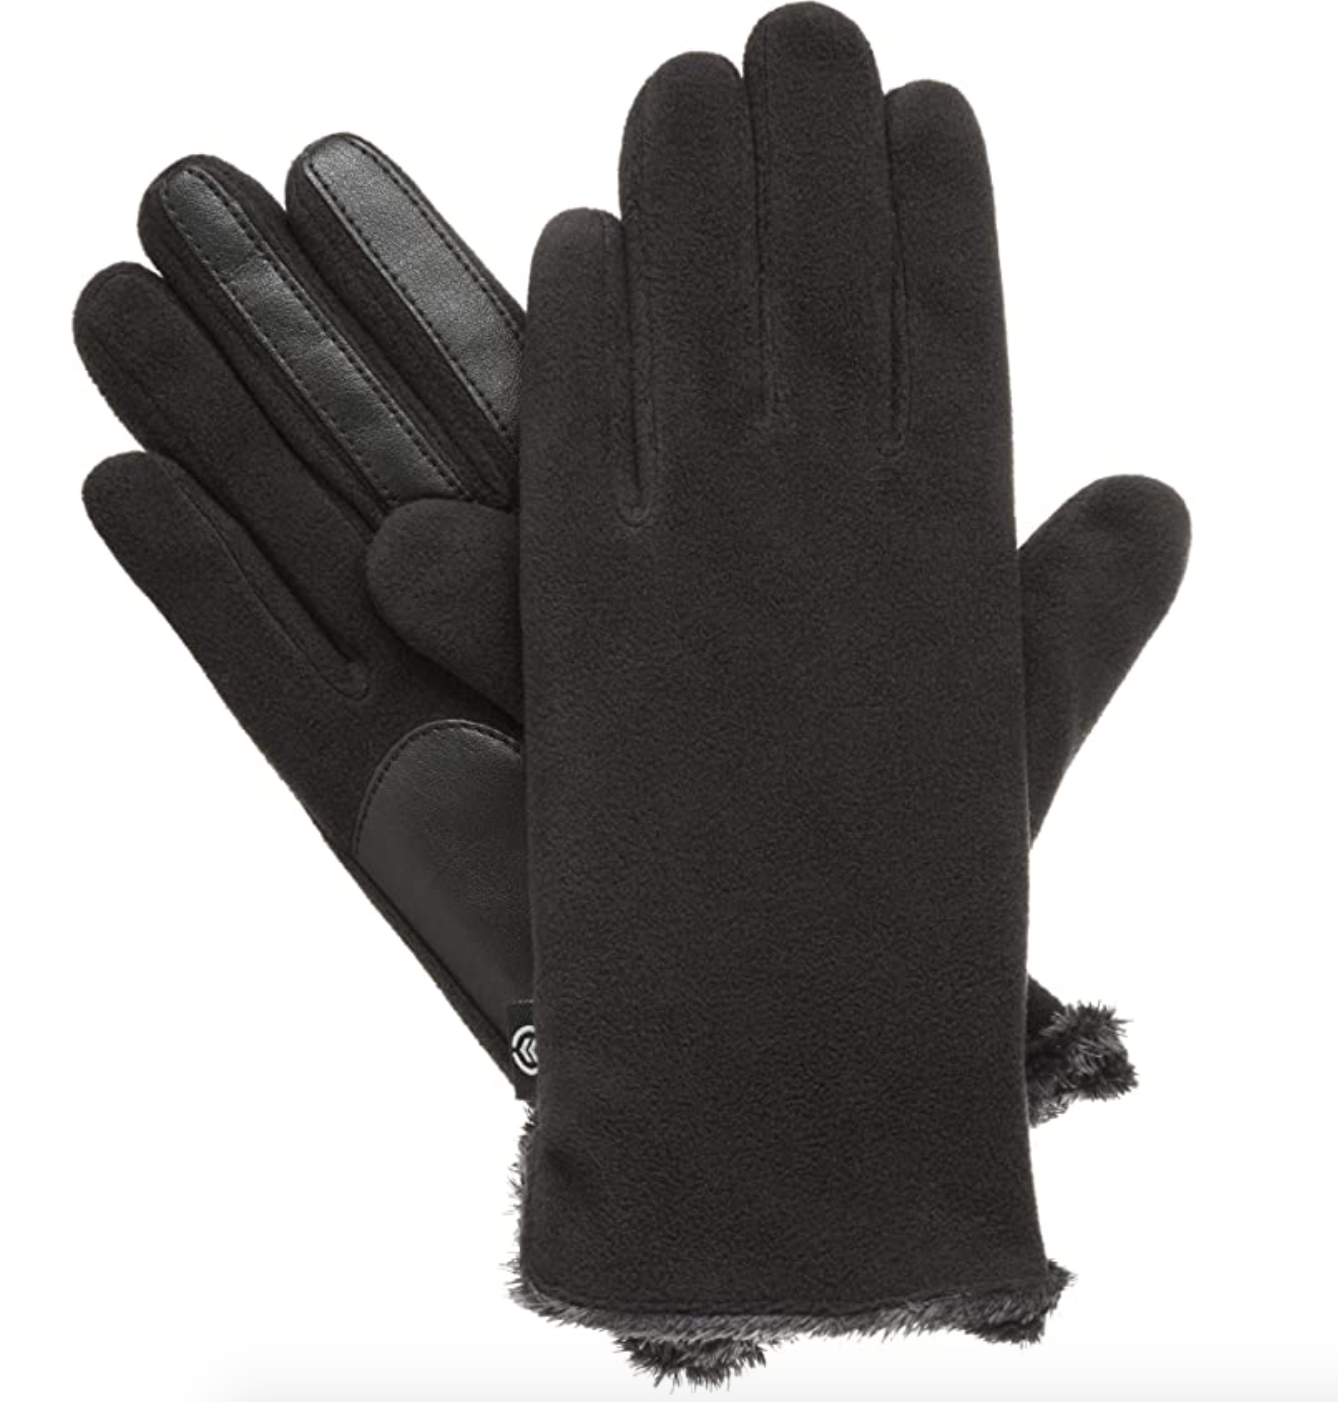 Wool Fleece Lined Warm Gloves Touchscreen Texting Thick Thermal Snow Driving Gloves REDESS Winter Leather Gloves for Women 